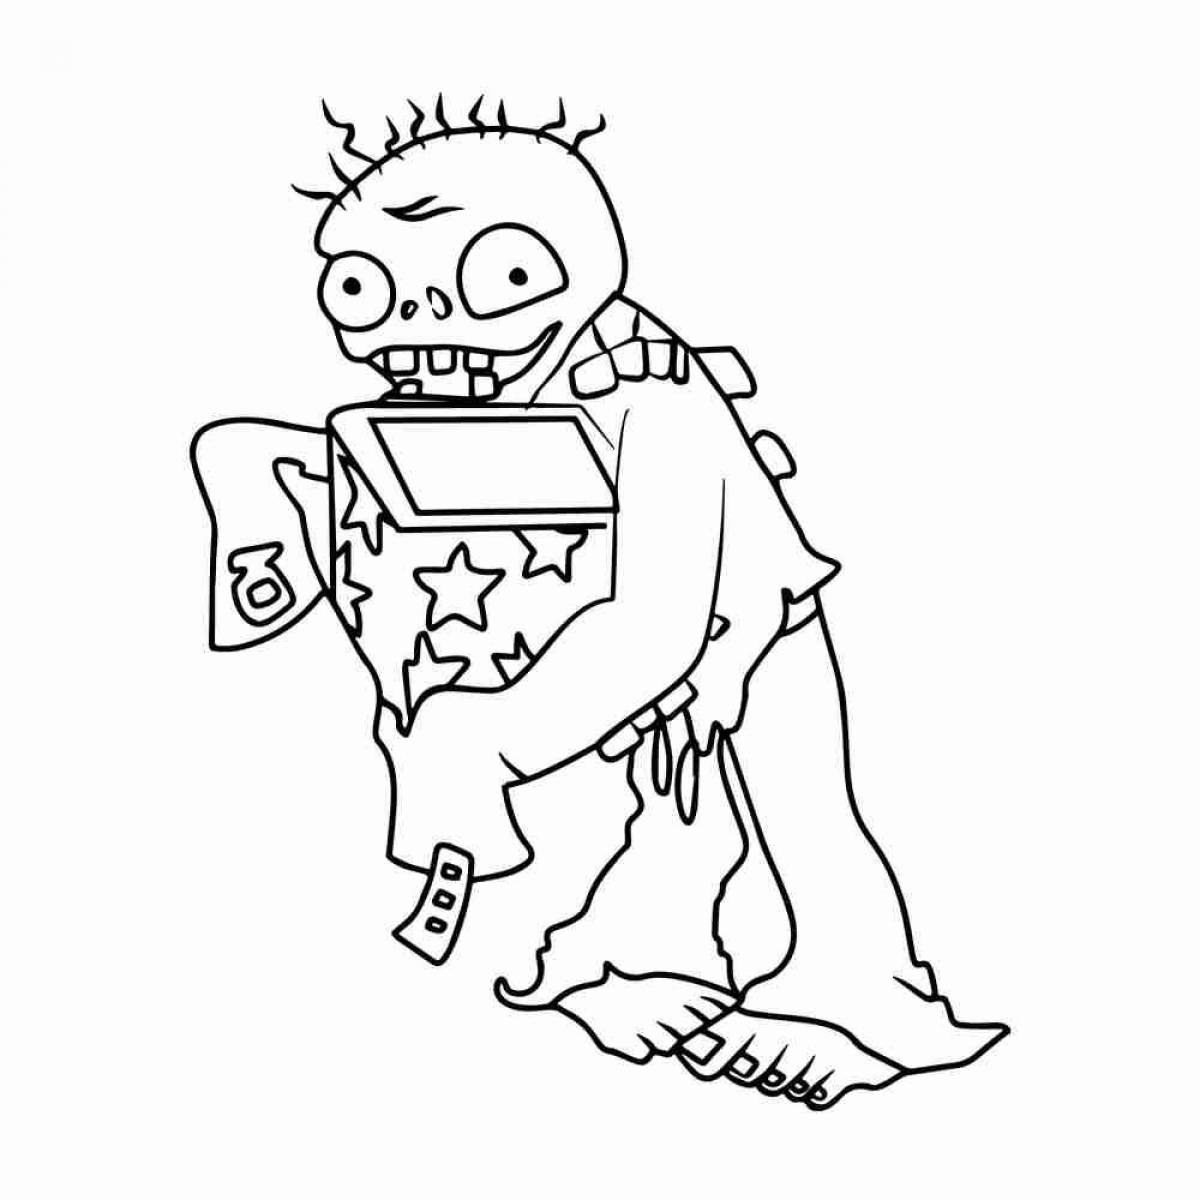 Unfriendly zombie coloring page